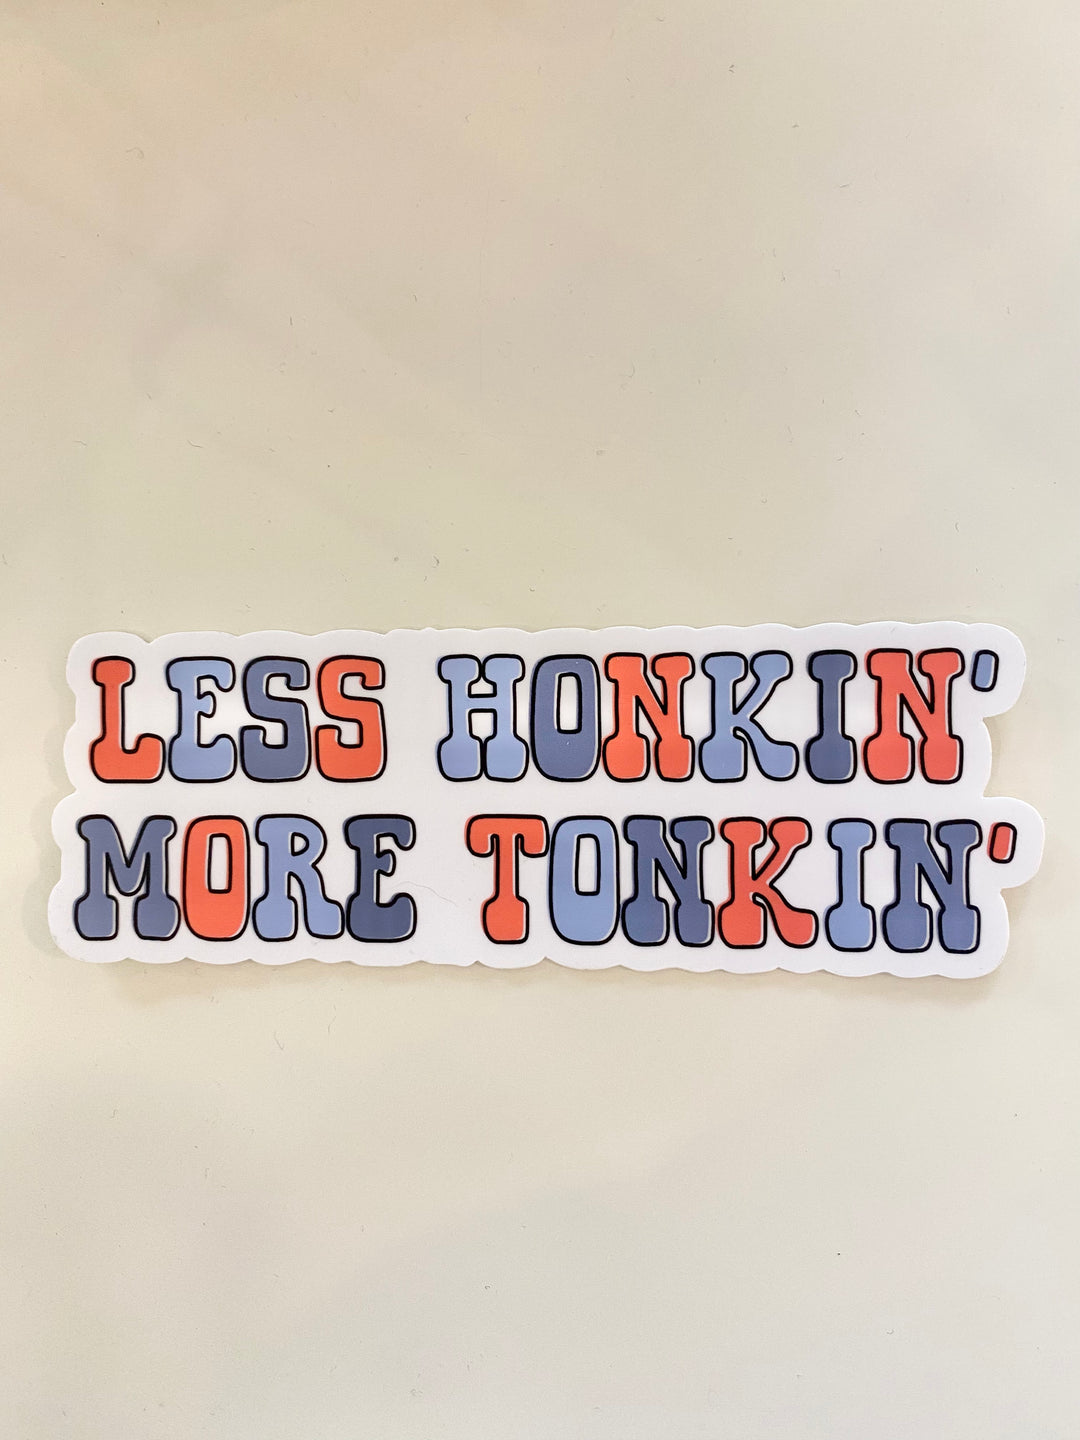 Less Honkin' More Tonkin' - The Teal Antler Boutique